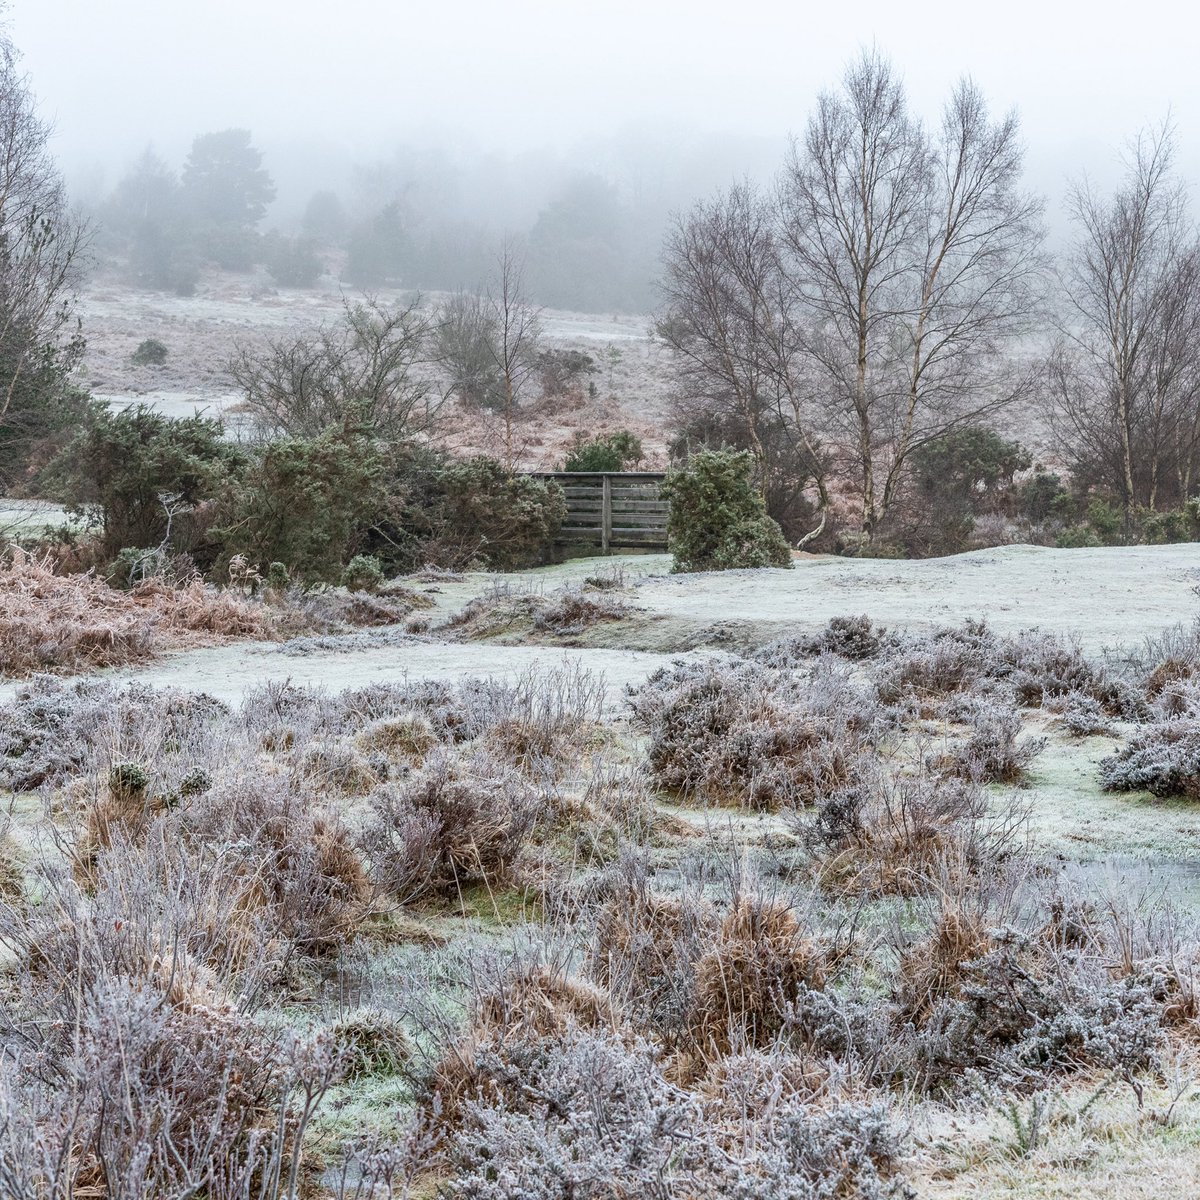 Loving how the frost and fog transforms our Forest landscape

#gloriousbritain #thenewforest 
#guardiantravel 
#forestryengland #uk 
#nationalparks 
#ukinfocus #fordingbridge
#newforest #newforestnationalpark 
#bbcweatherwatcher #newforestwalks #frost  #forest #forestphotography